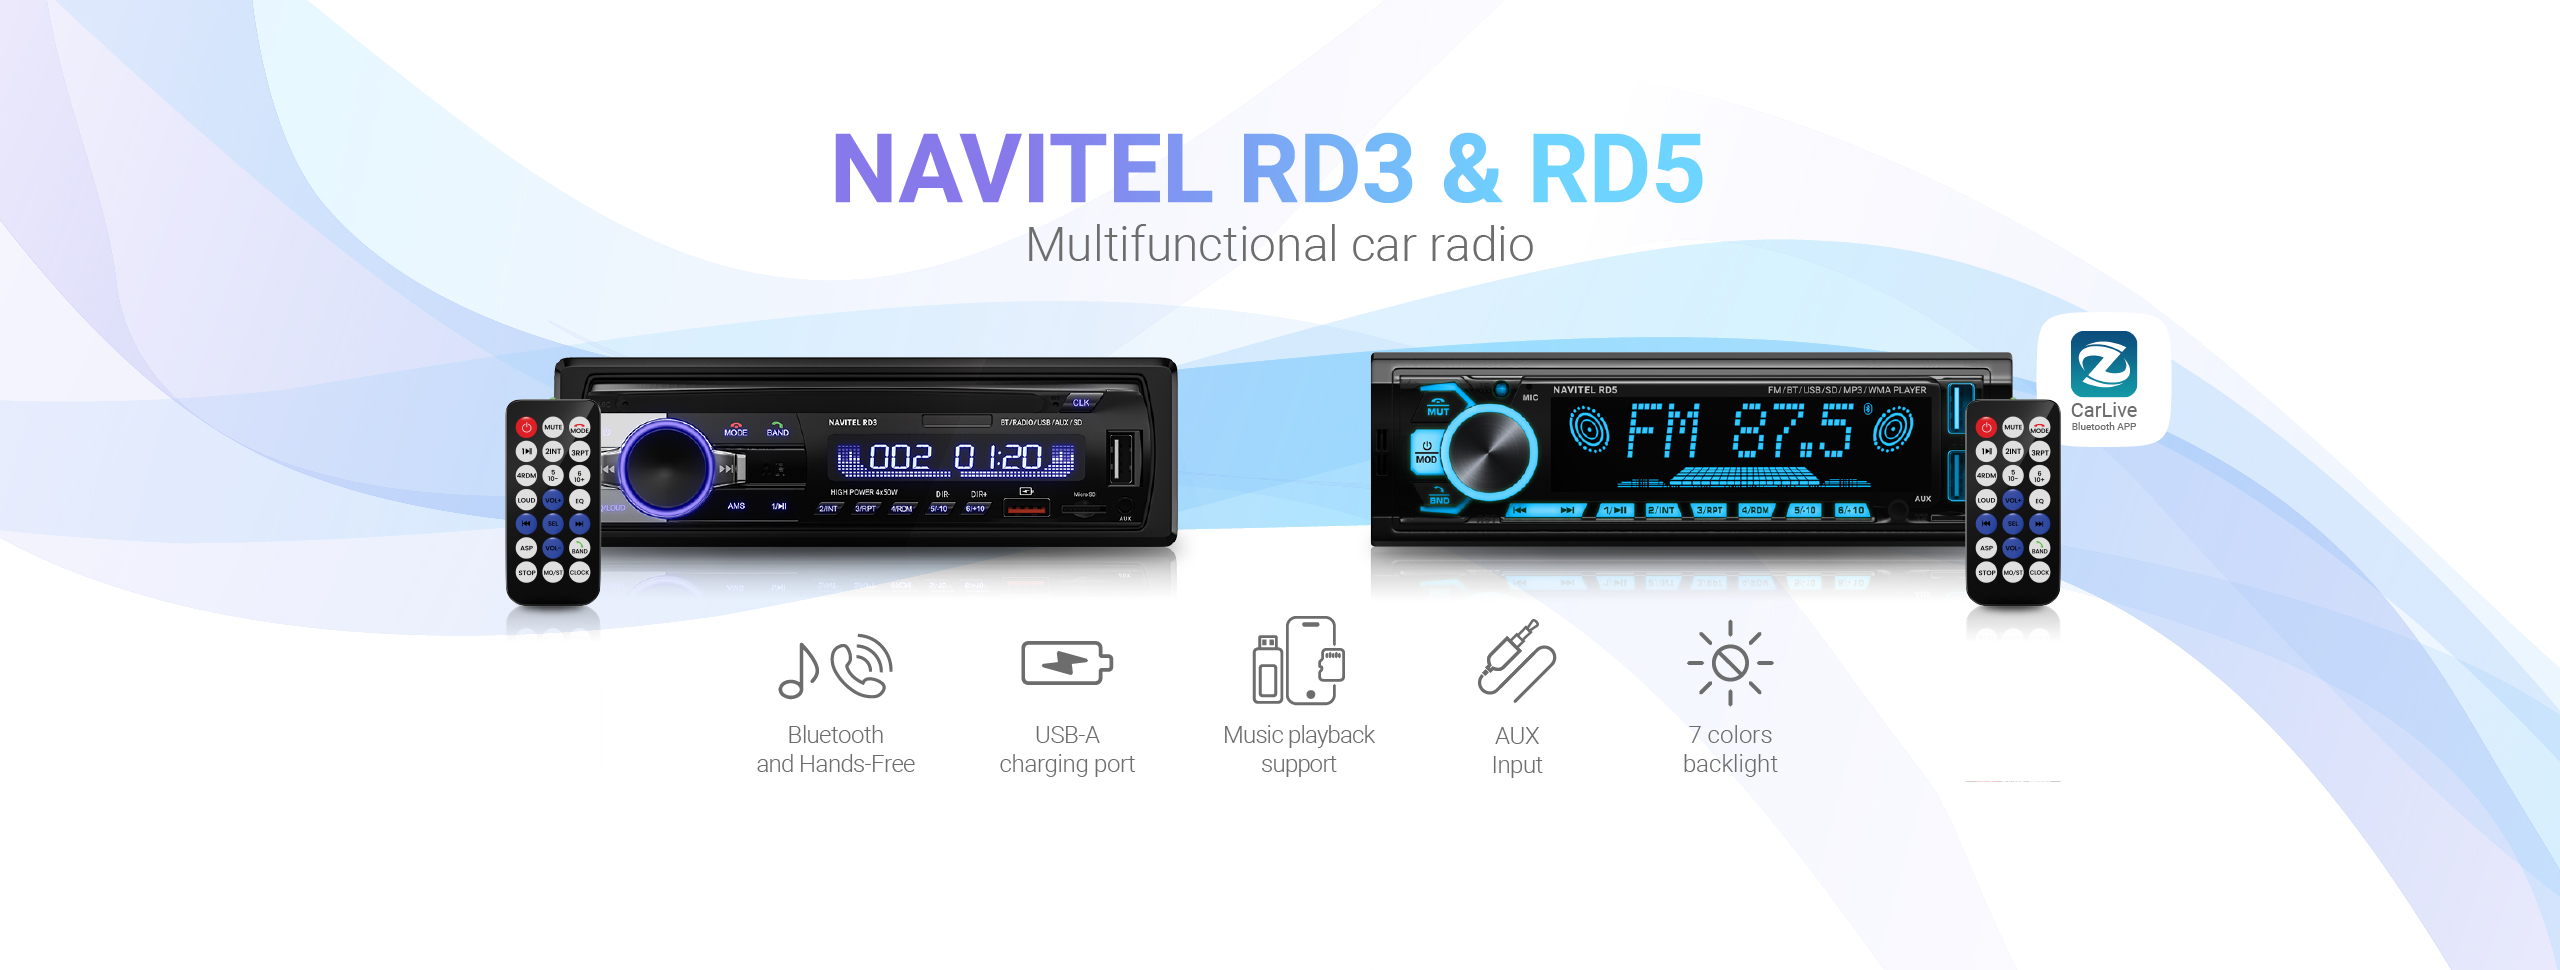 New devices from NAVITEL: multifunctional car radio NAVITEL RD3 and RD5